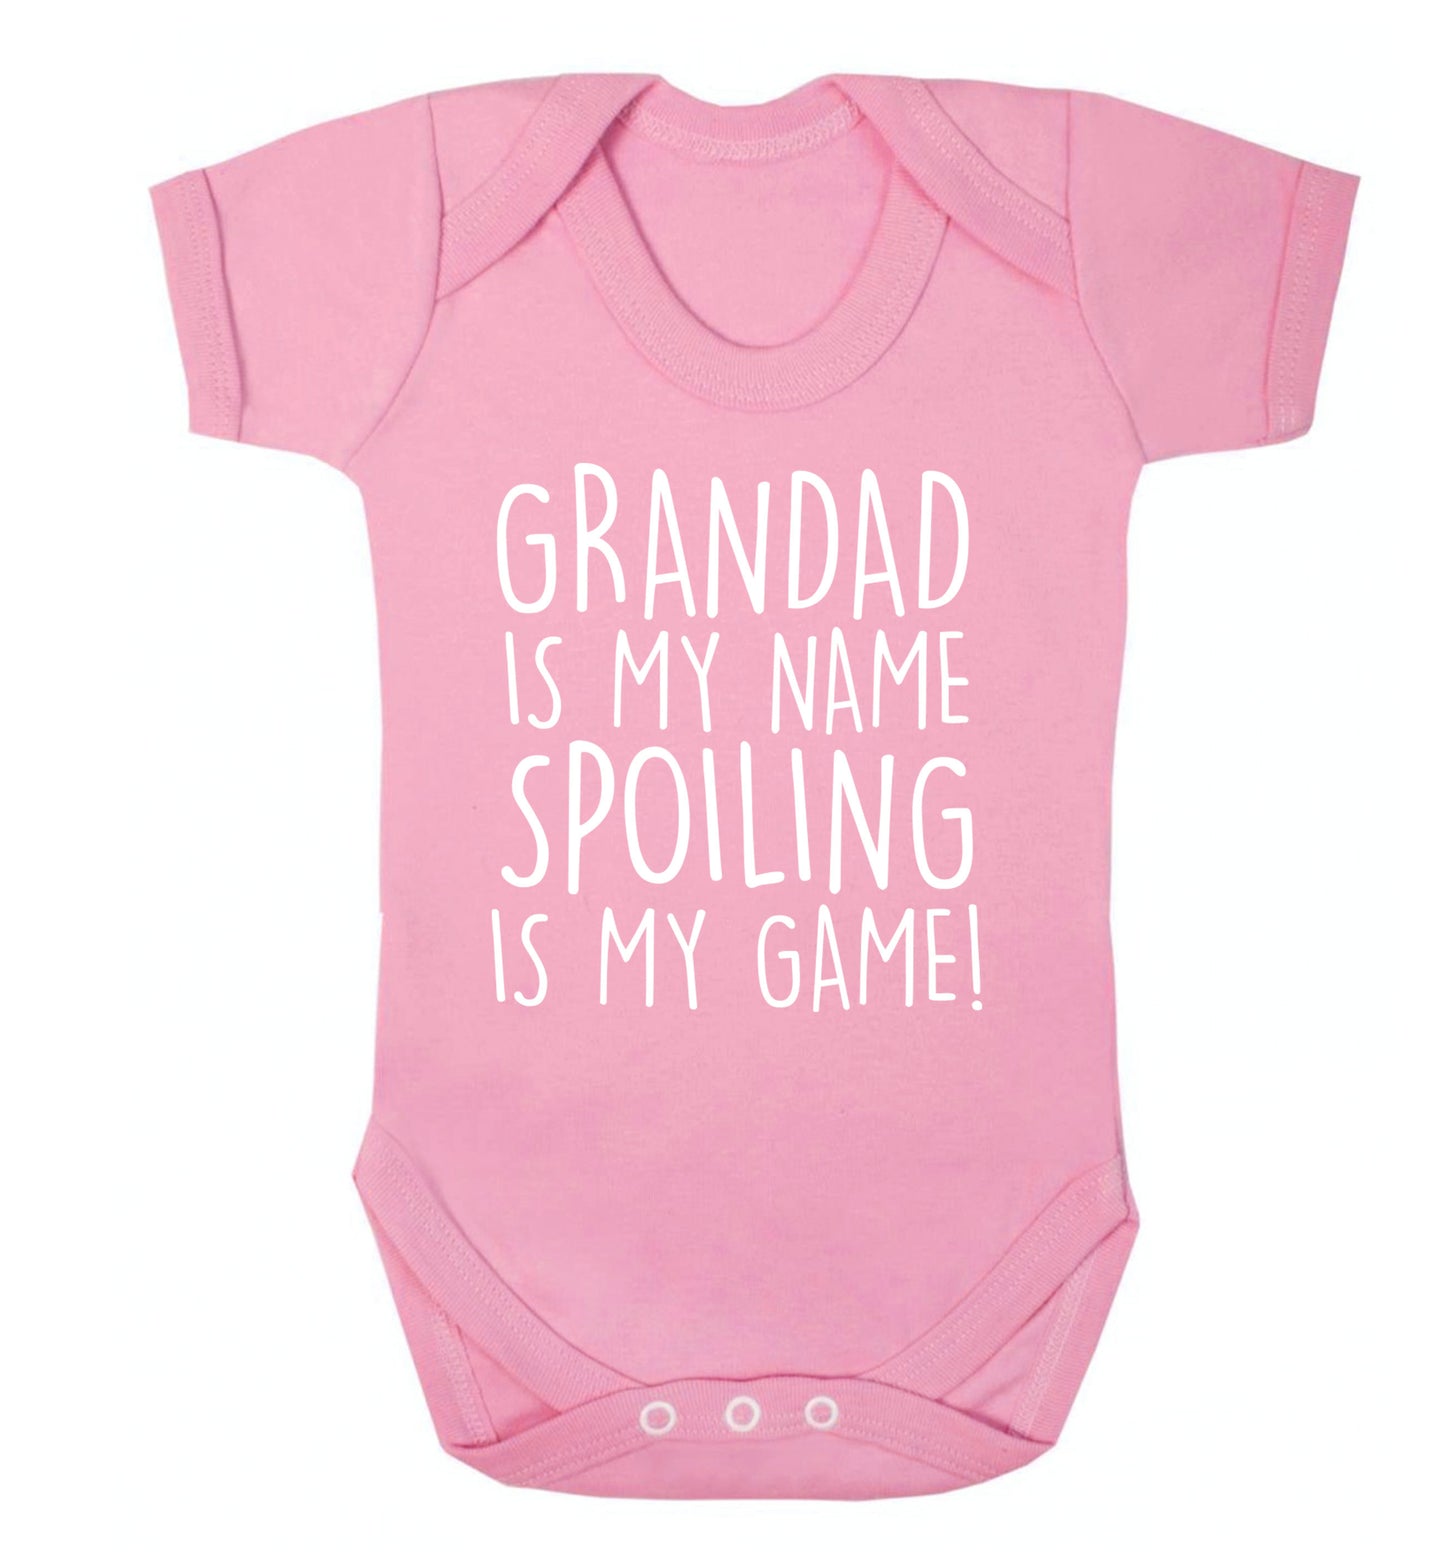 Grandad is my name, spoiling is my game Baby Vest pale pink 18-24 months